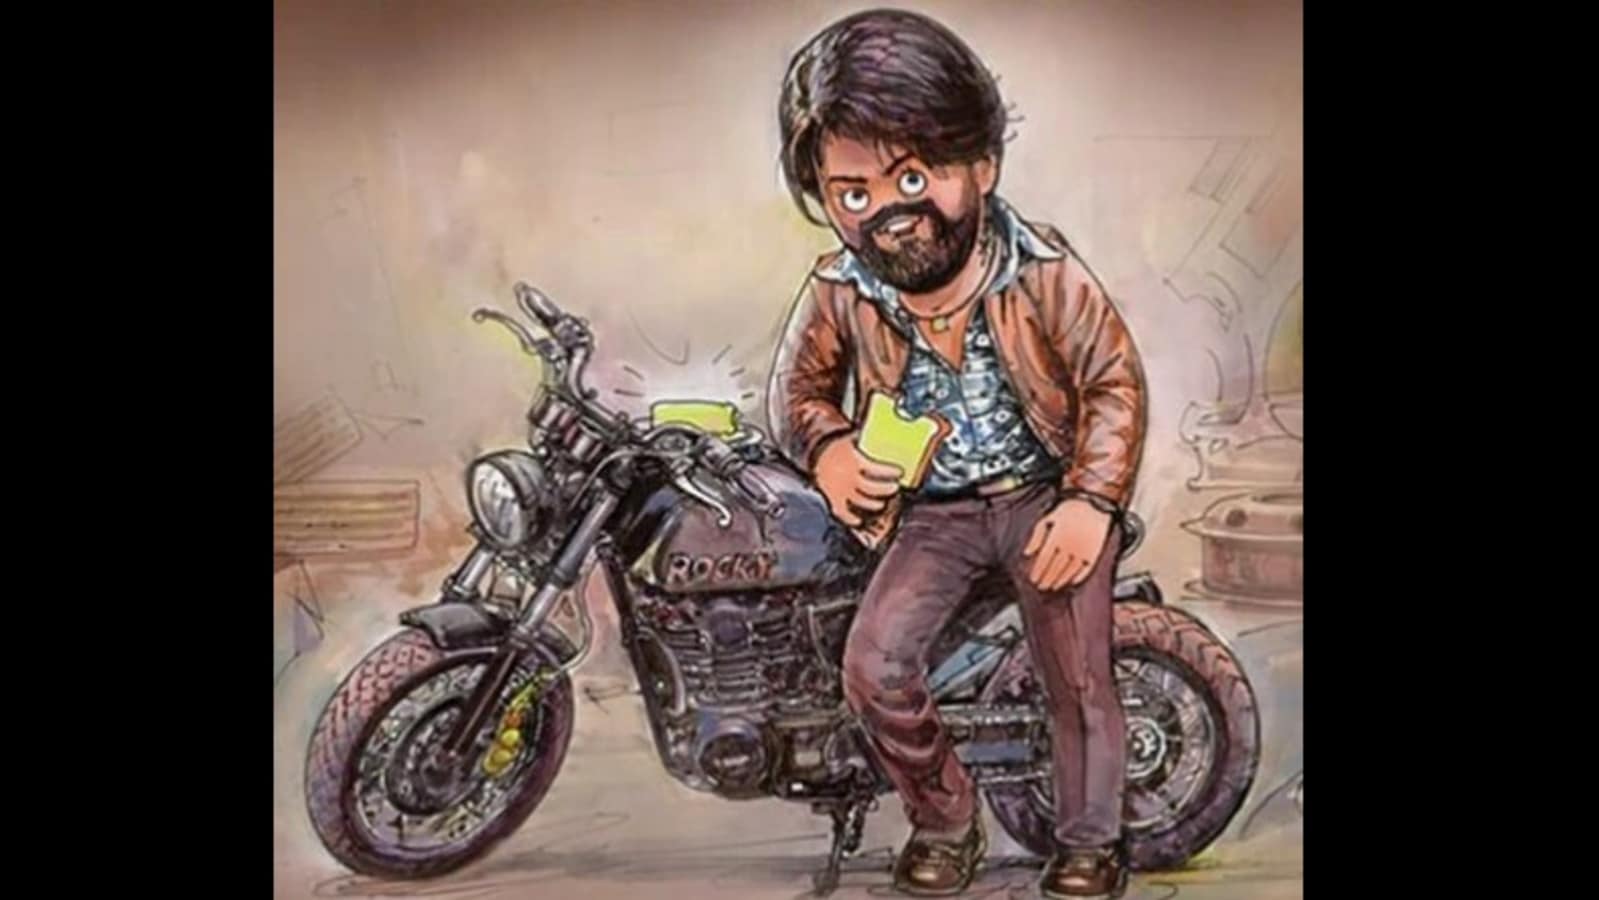 Artist Shubham Dogra - Pencil Sketch of Kannada actor Yash from #KGF movie  drawn by me :) | Facebook